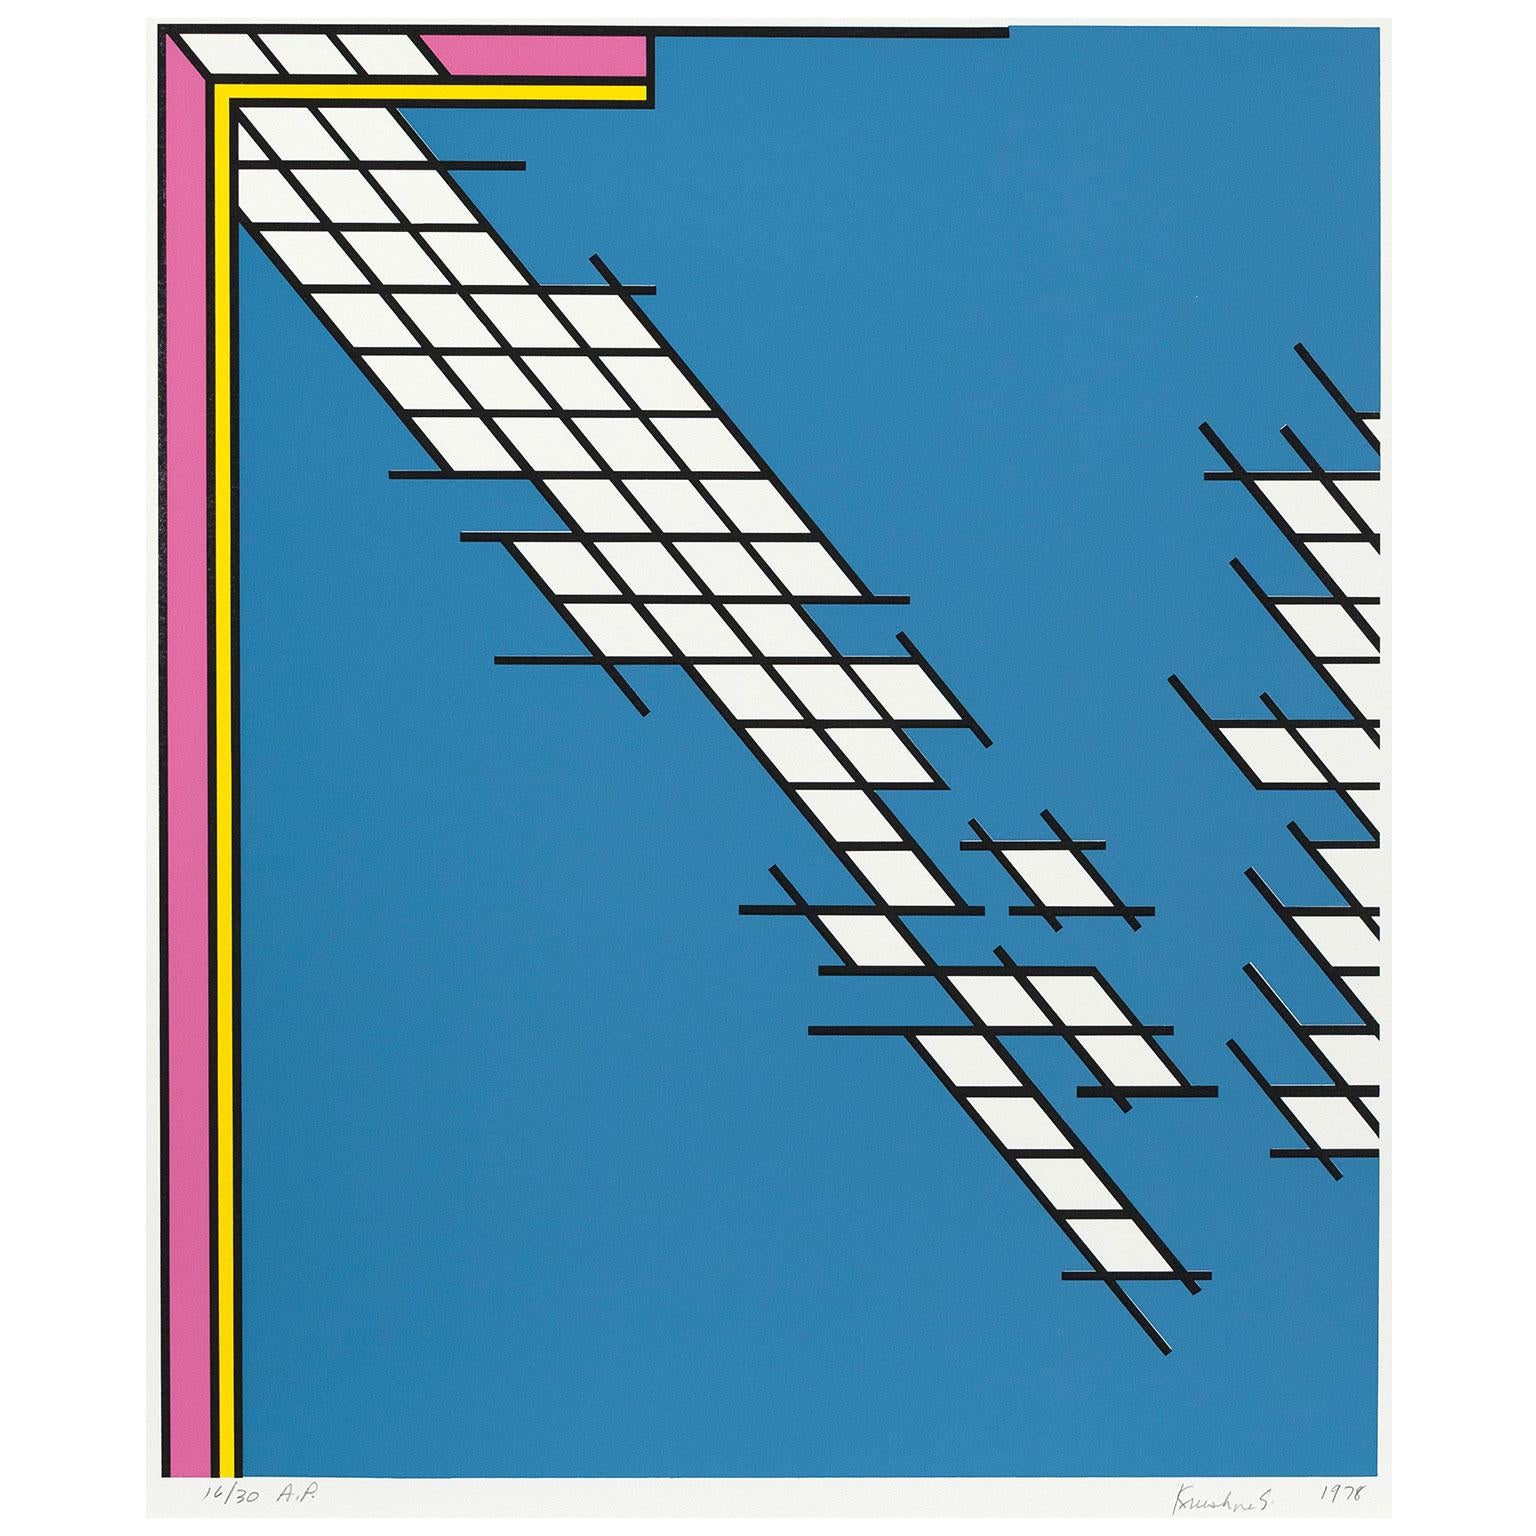 Nicholas Krushenick (1929-1999) was an American abstract painter whose unique aesthetic fused Pop Art, Minimalism with a touch of Op Art.

Native to New York, Krushenick’s career began in the late 1950s. He would become known for his stylistic